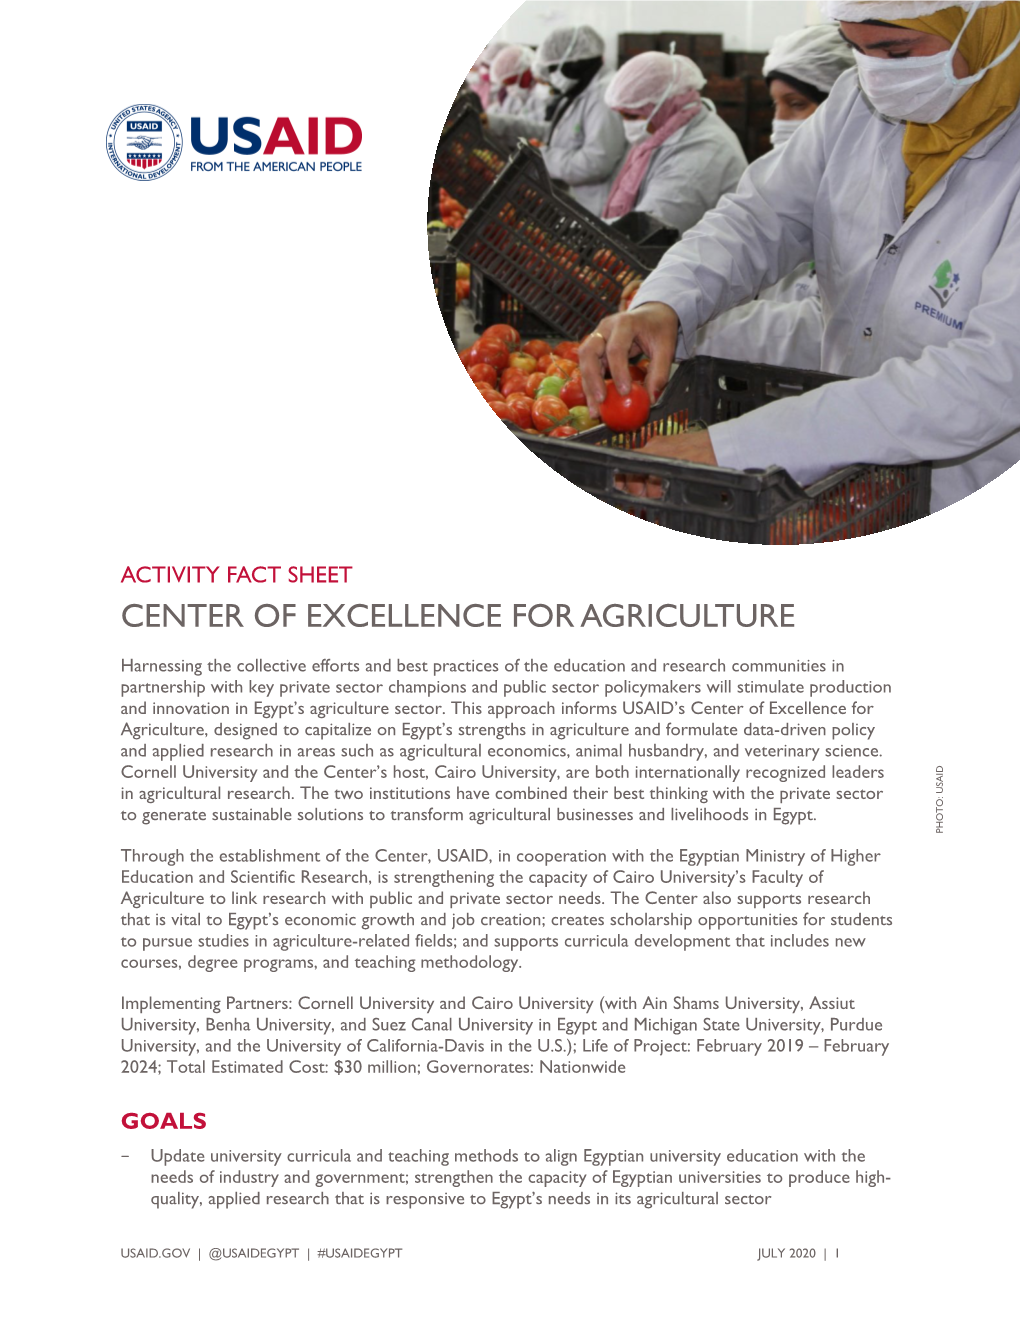 USAID/Egypt Activity Fact Sheet: Center of Excellence for Agriculture